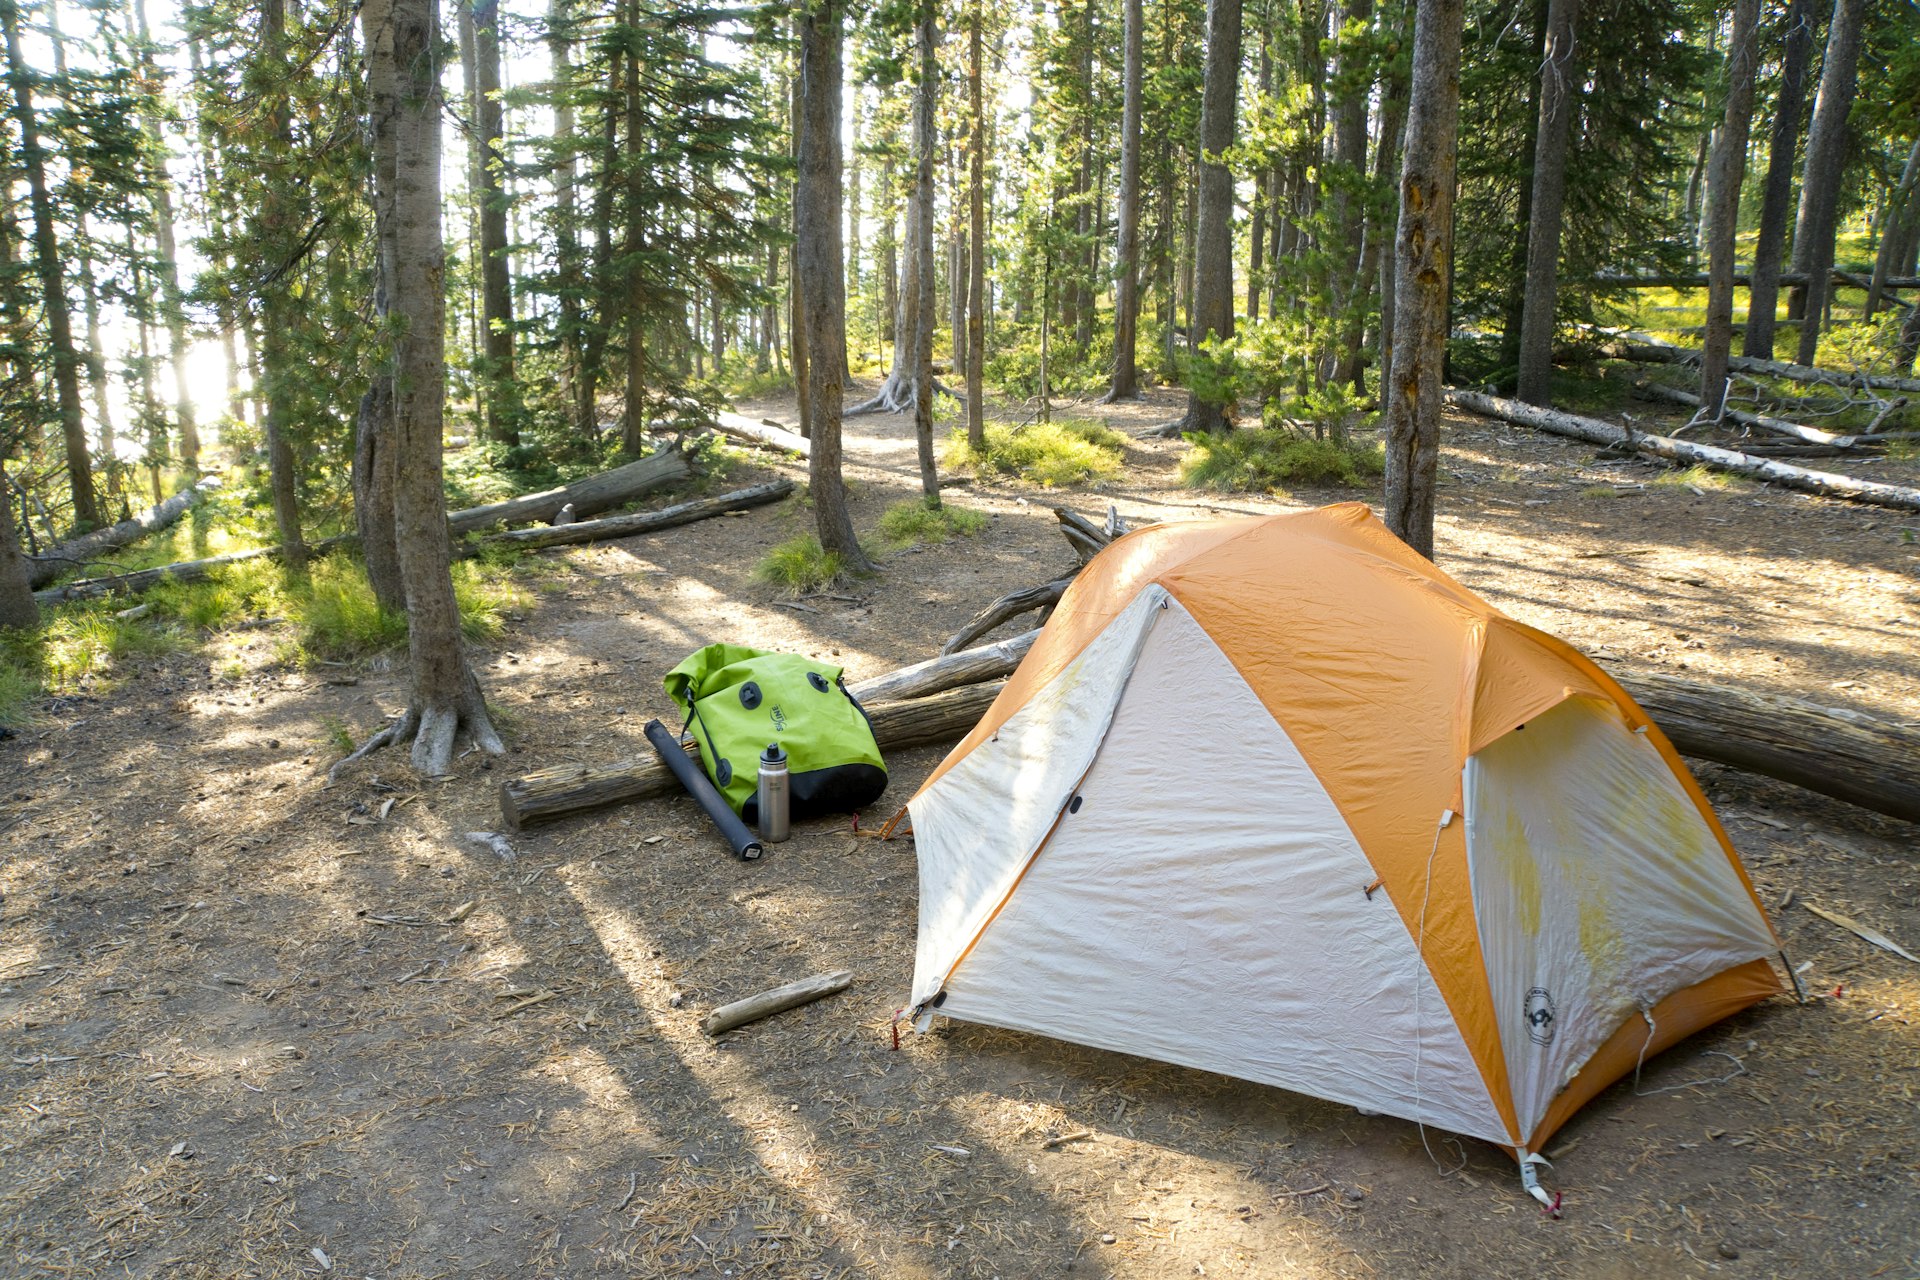 Camping brings you closest to the serene sights and sounds of Yellowstone